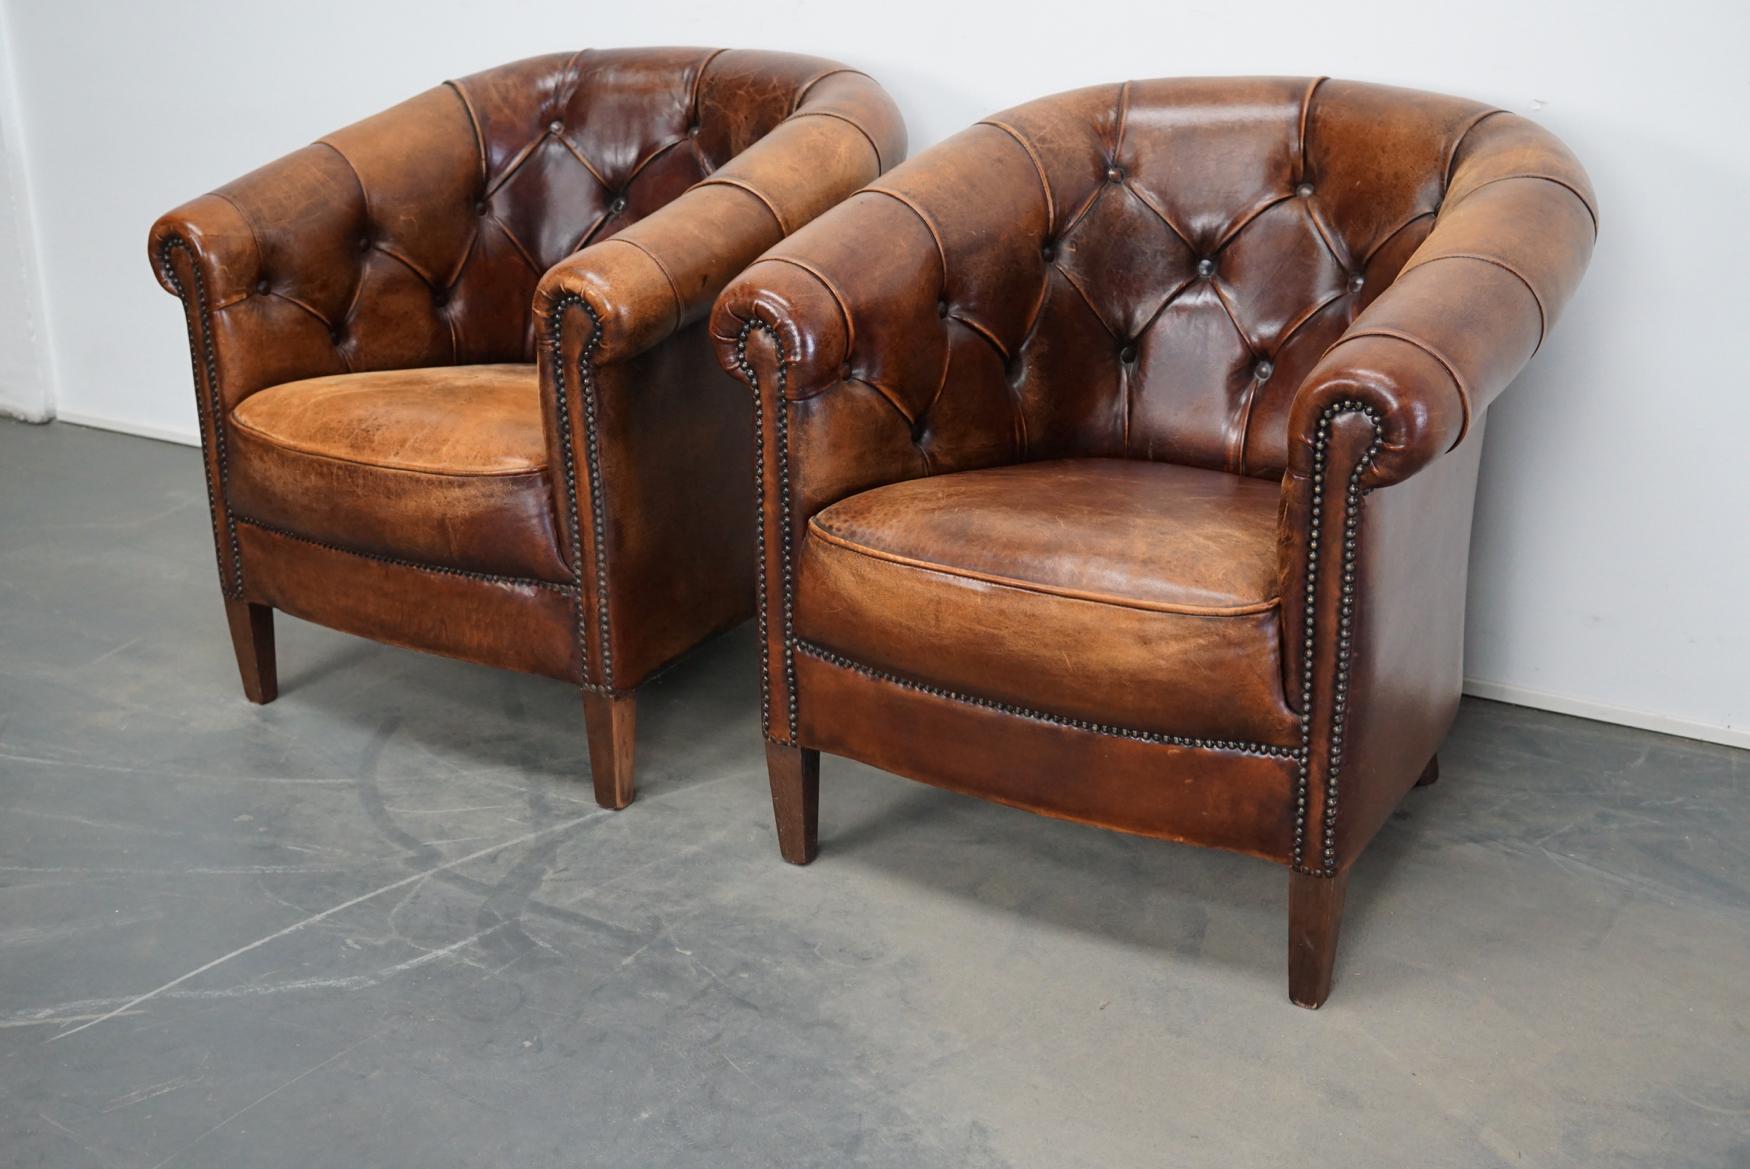 This pair of cognac-colored leather club chairs come from the Netherlands. They are upholstered with cognac-colored leather and feature metal rivets and wooden legs.